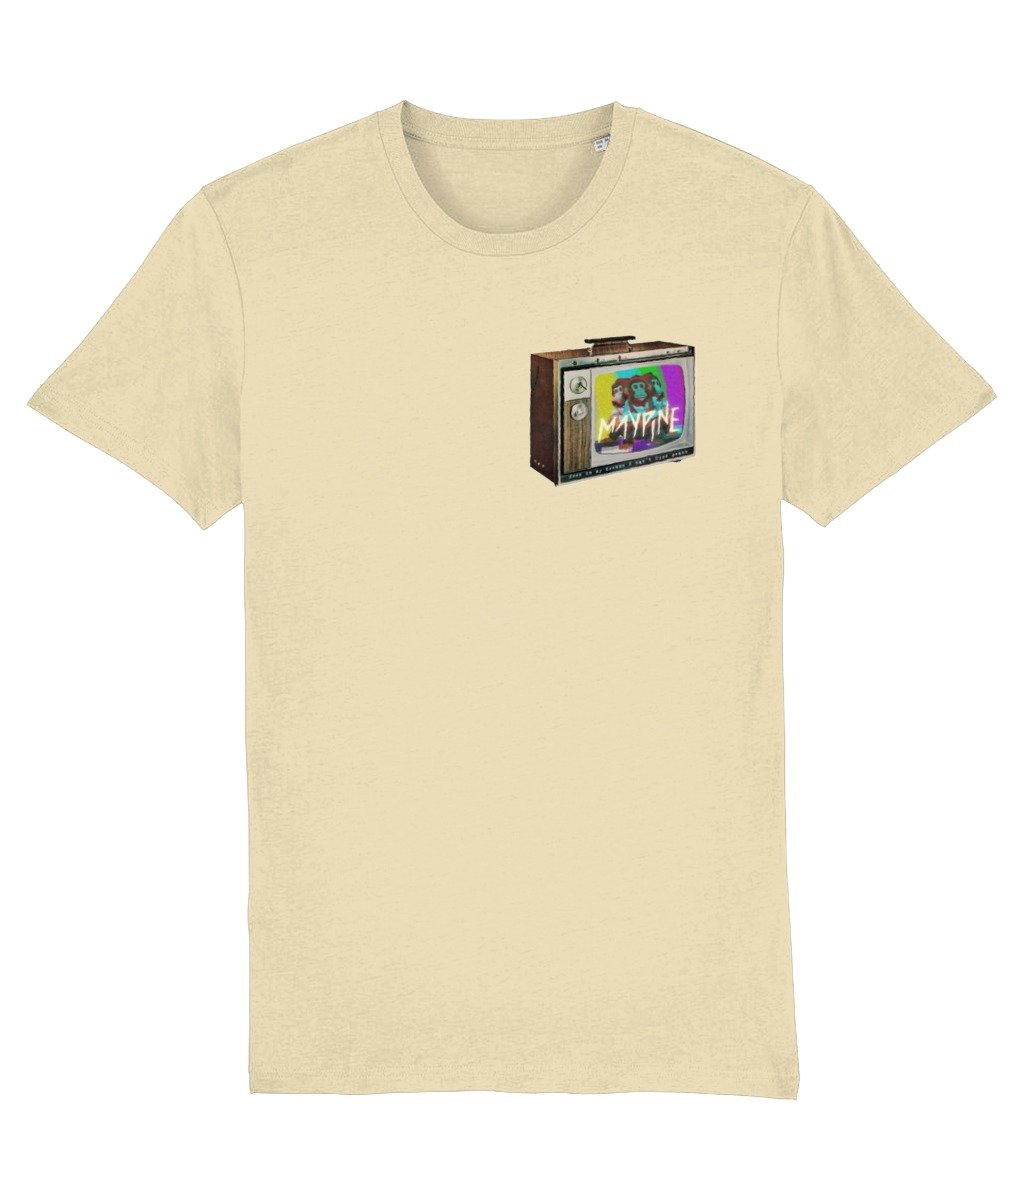 Image of Butter MAYPINE tee